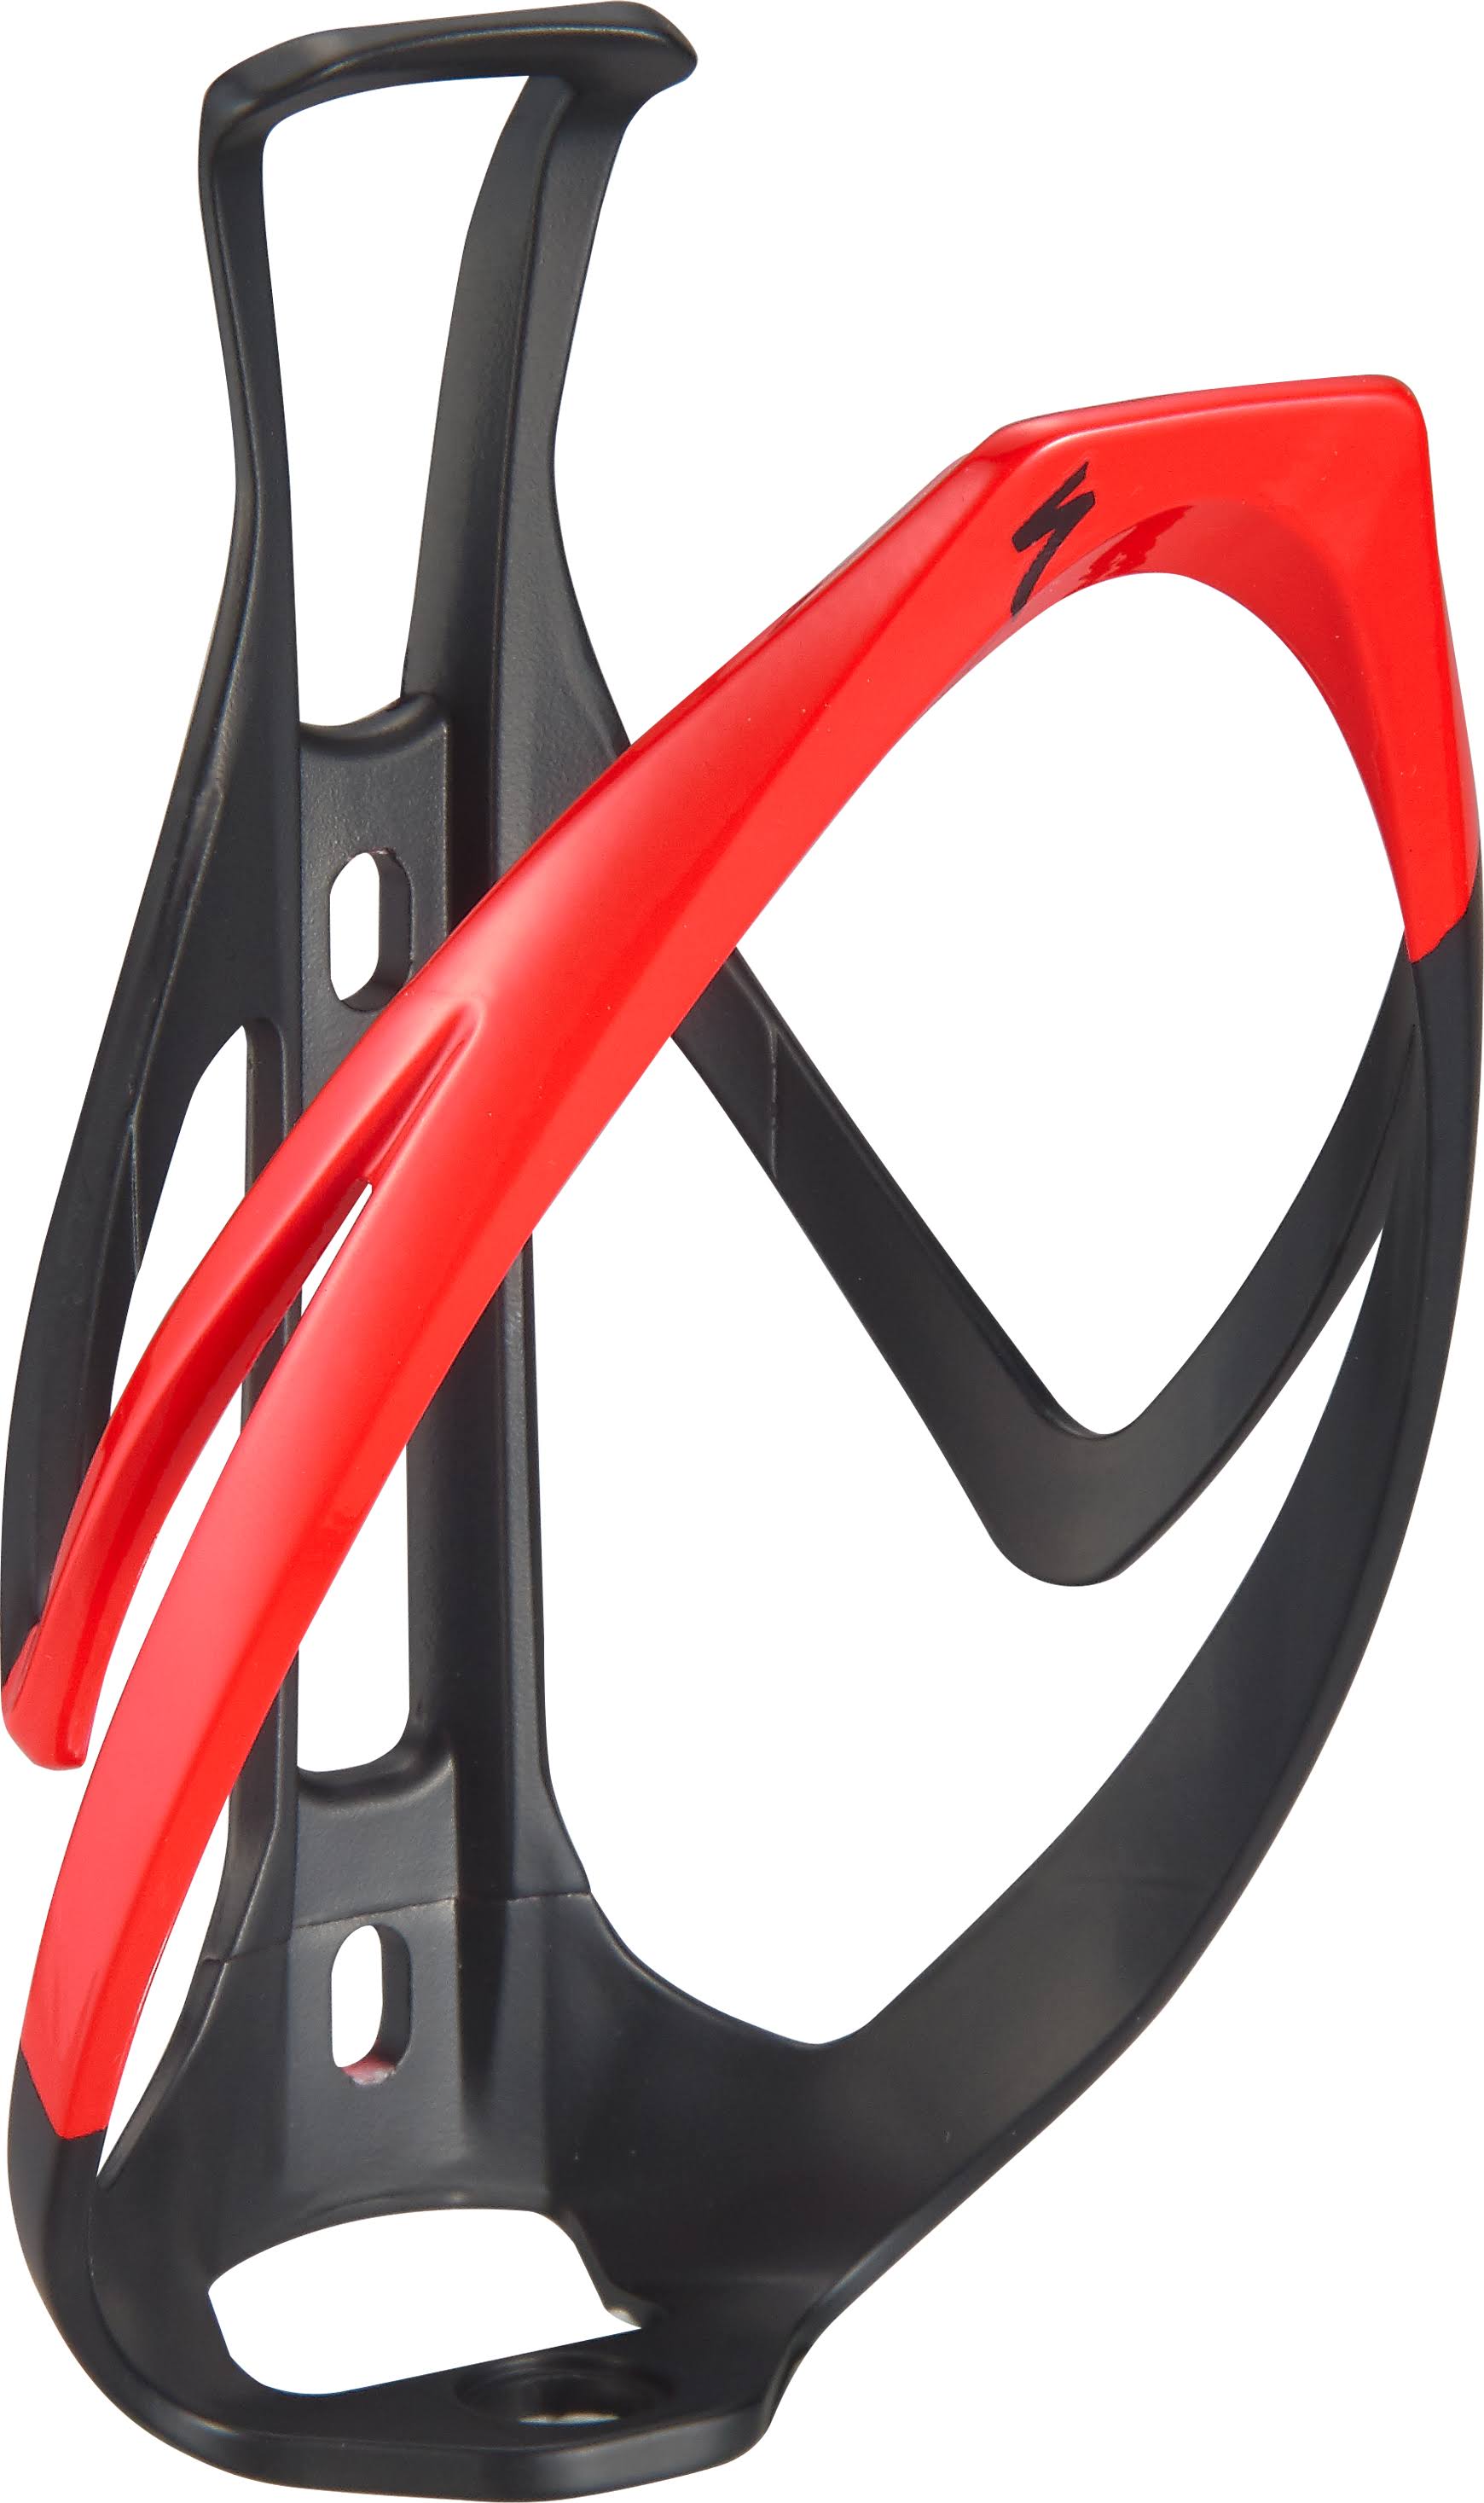 Specialized Rib Cage II Bottle Cage - Black/Red